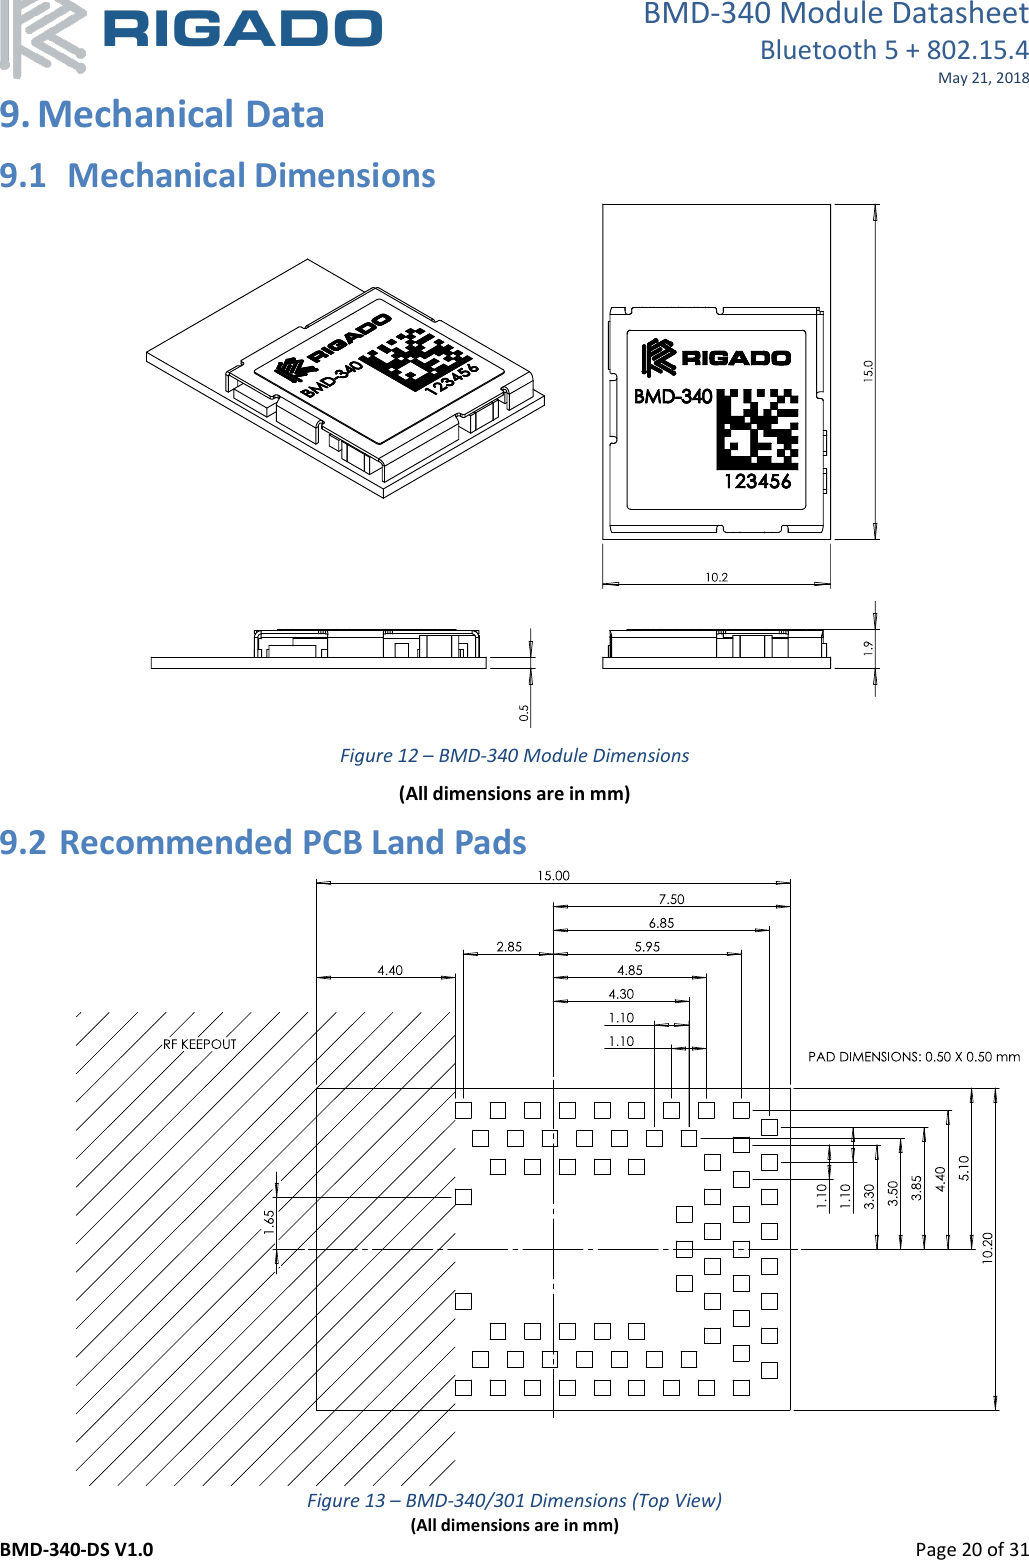 BMD-340 Module Datasheet Bluetooth 5 + 802.15.4 May 21, 2018 BMD-340-DS V1.0         Page 20 of 31 9. Mechanical Data 9.1  Mechanical Dimensions  Figure 12 – BMD-340 Module Dimensions (All dimensions are in mm) 9.2 Recommended PCB Land Pads  Figure 13 – BMD-340/301 Dimensions (Top View) (All dimensions are in mm) 